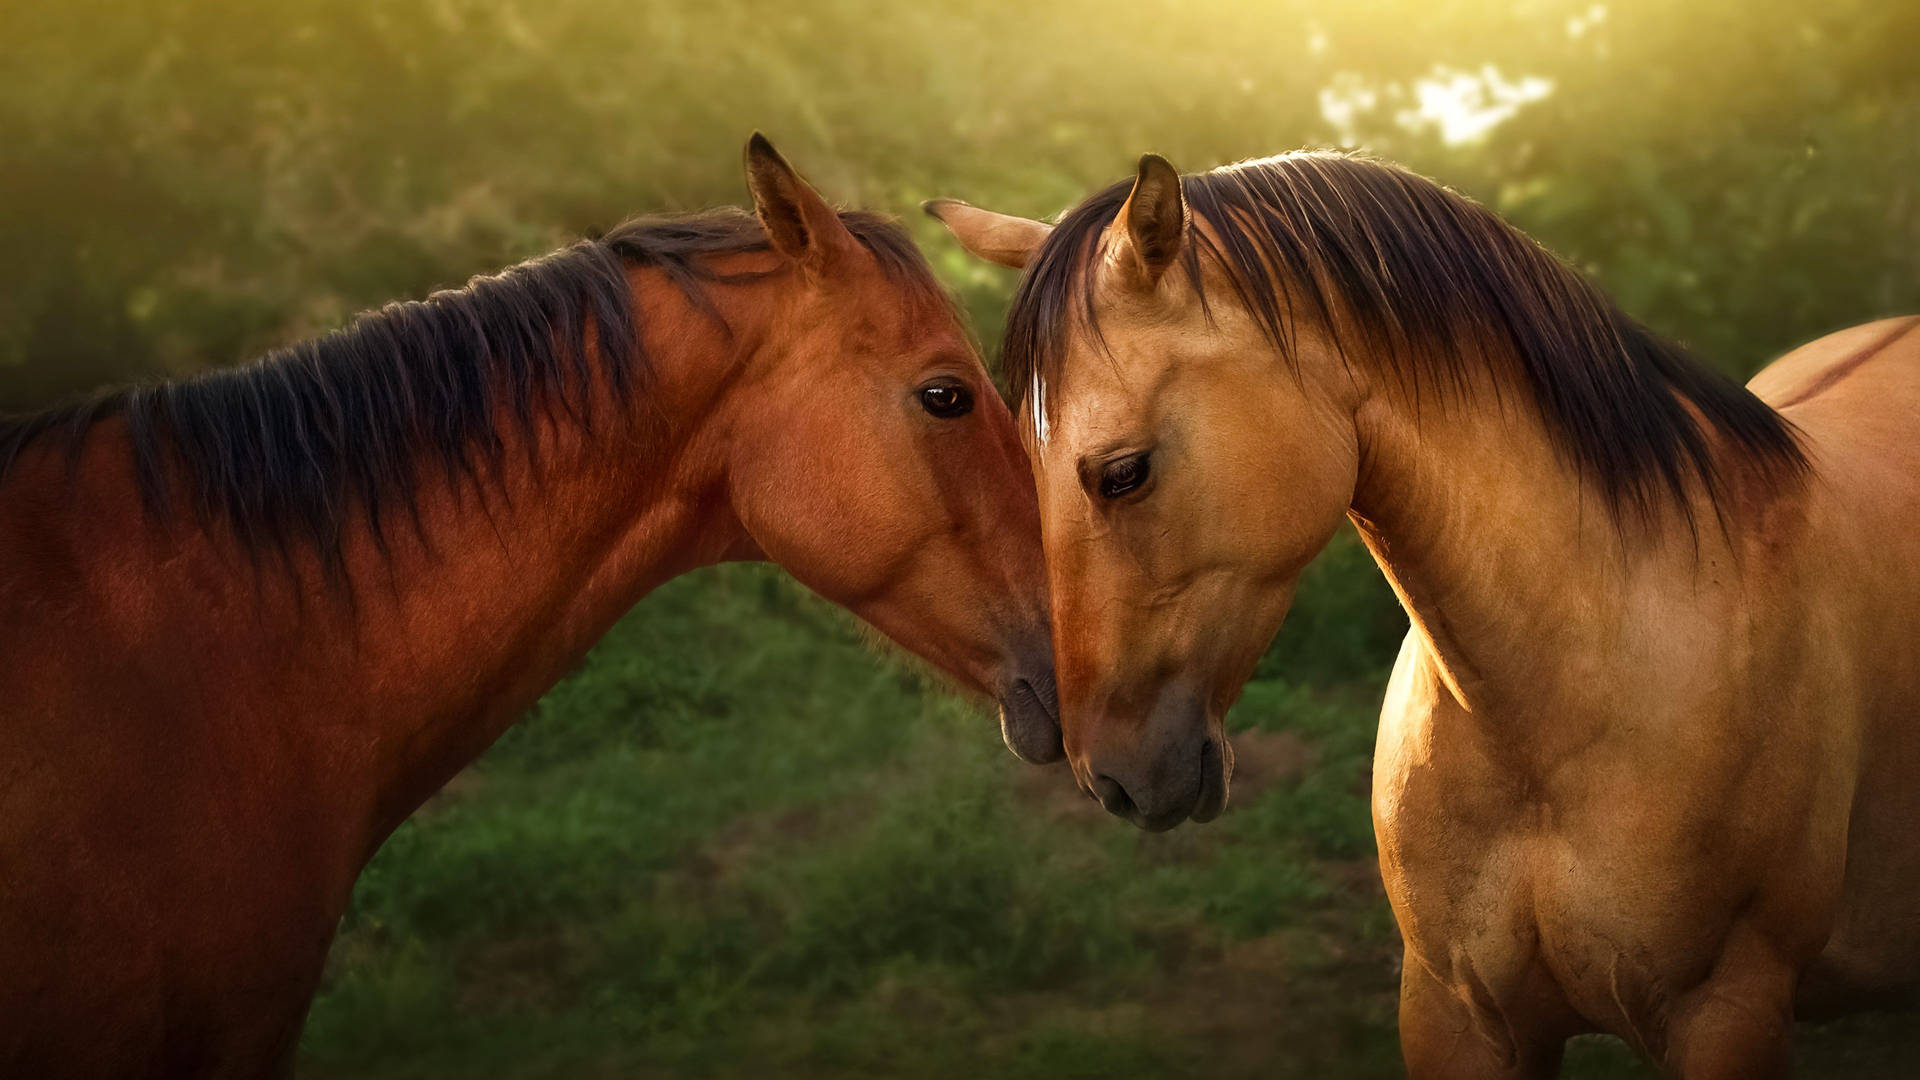 Beautiful Horses With Heads Together Wallpaper